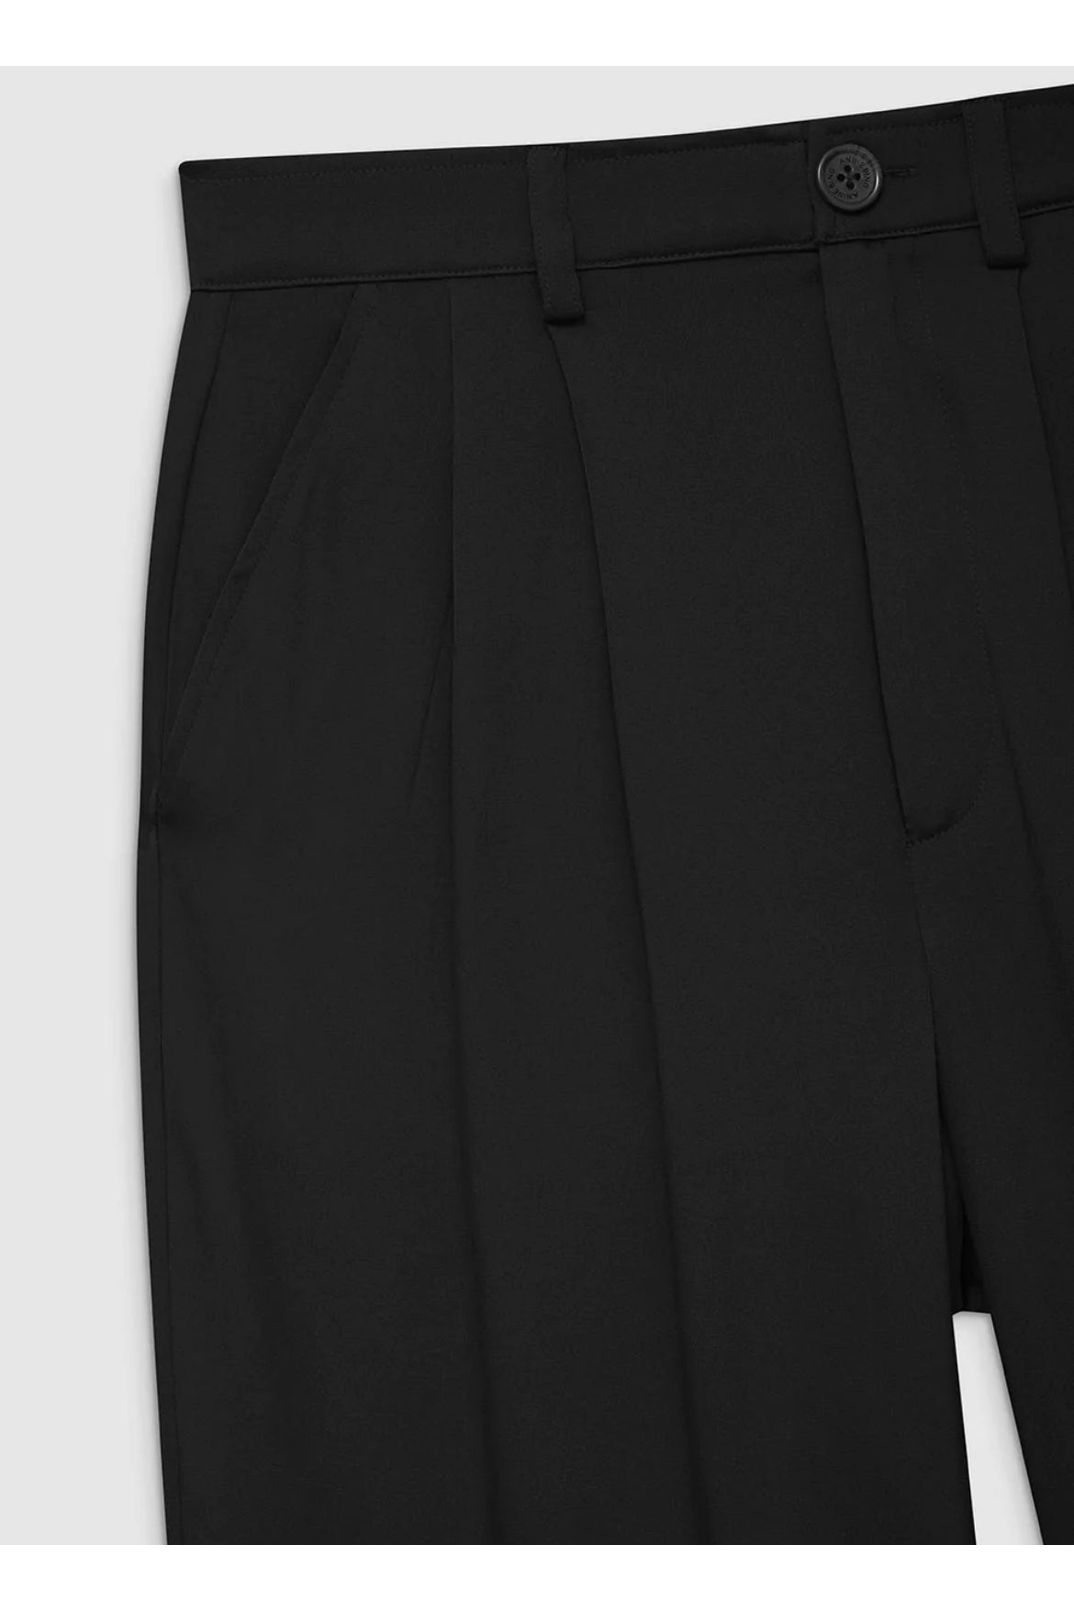 Carrie Pant in Black Silk by Anine Bing